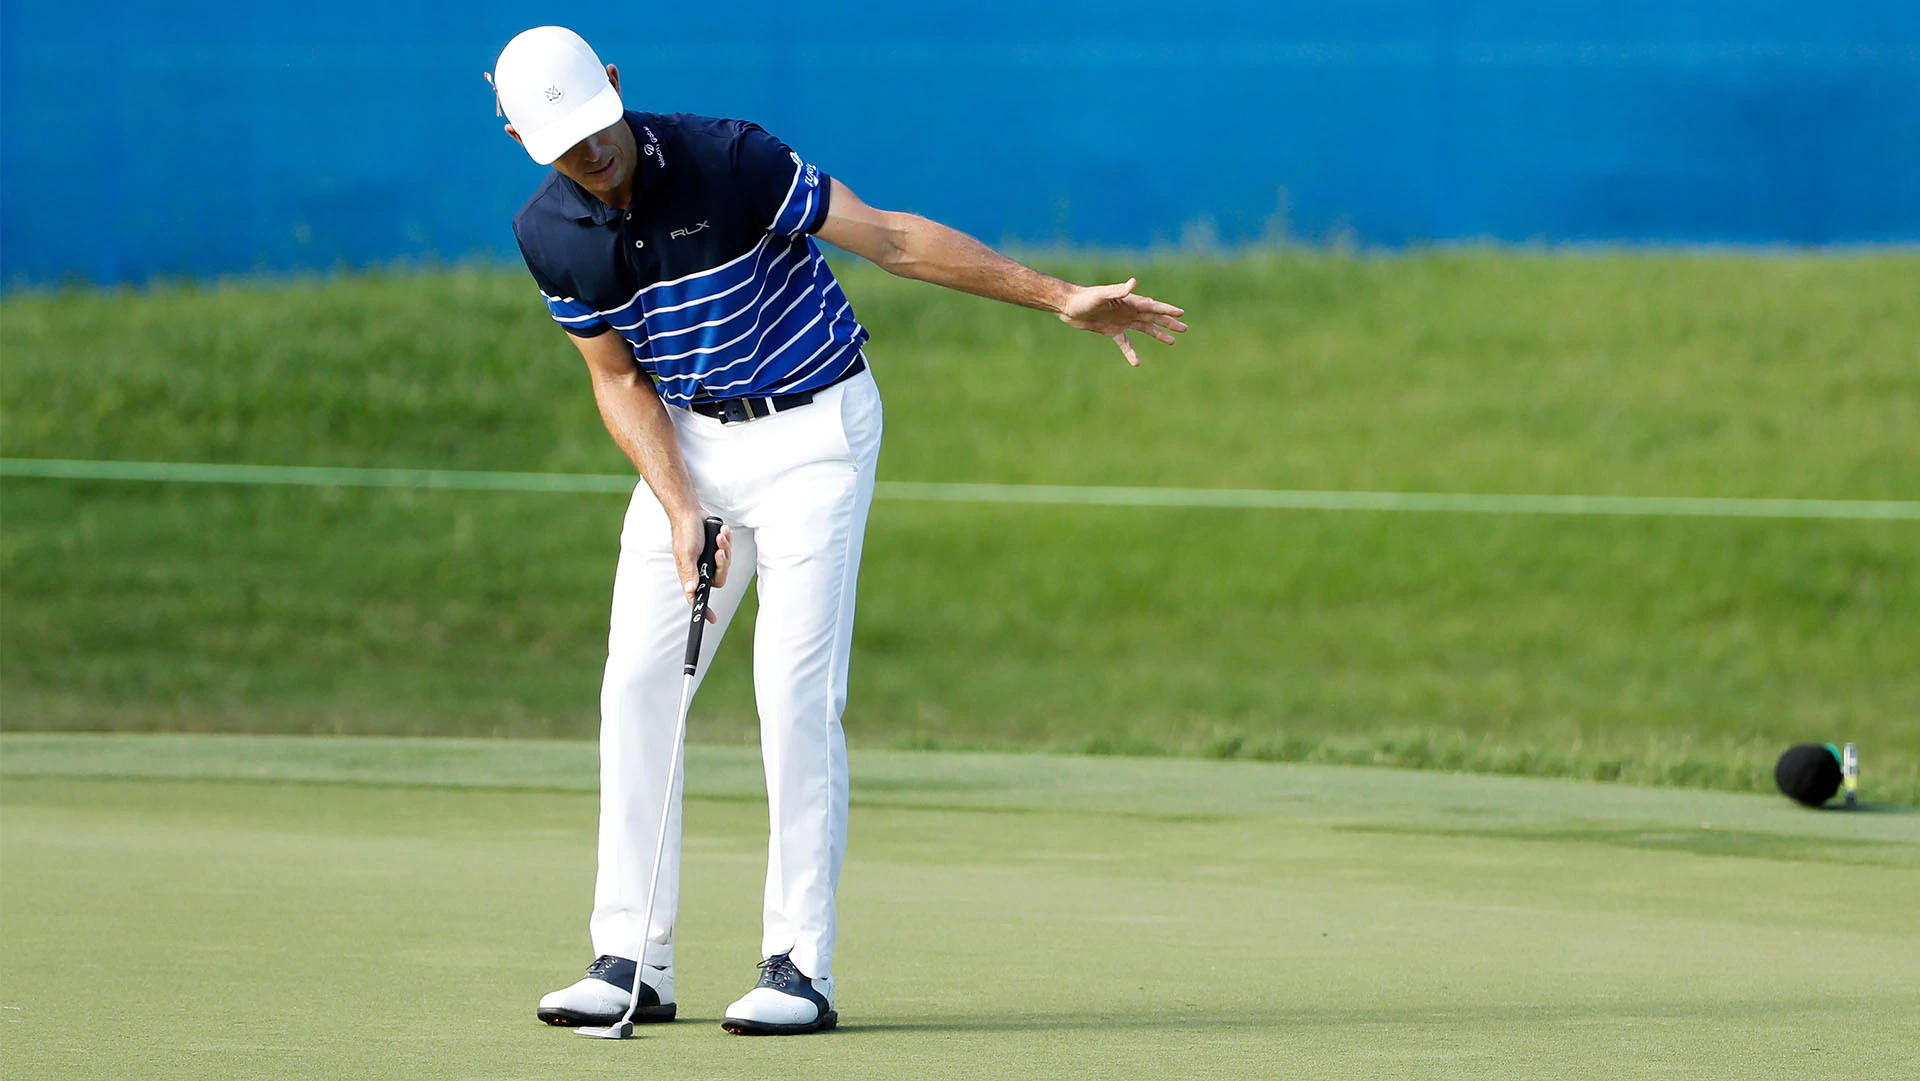 Billy Horschel’s hot putter not enough to keep up at Wyndham